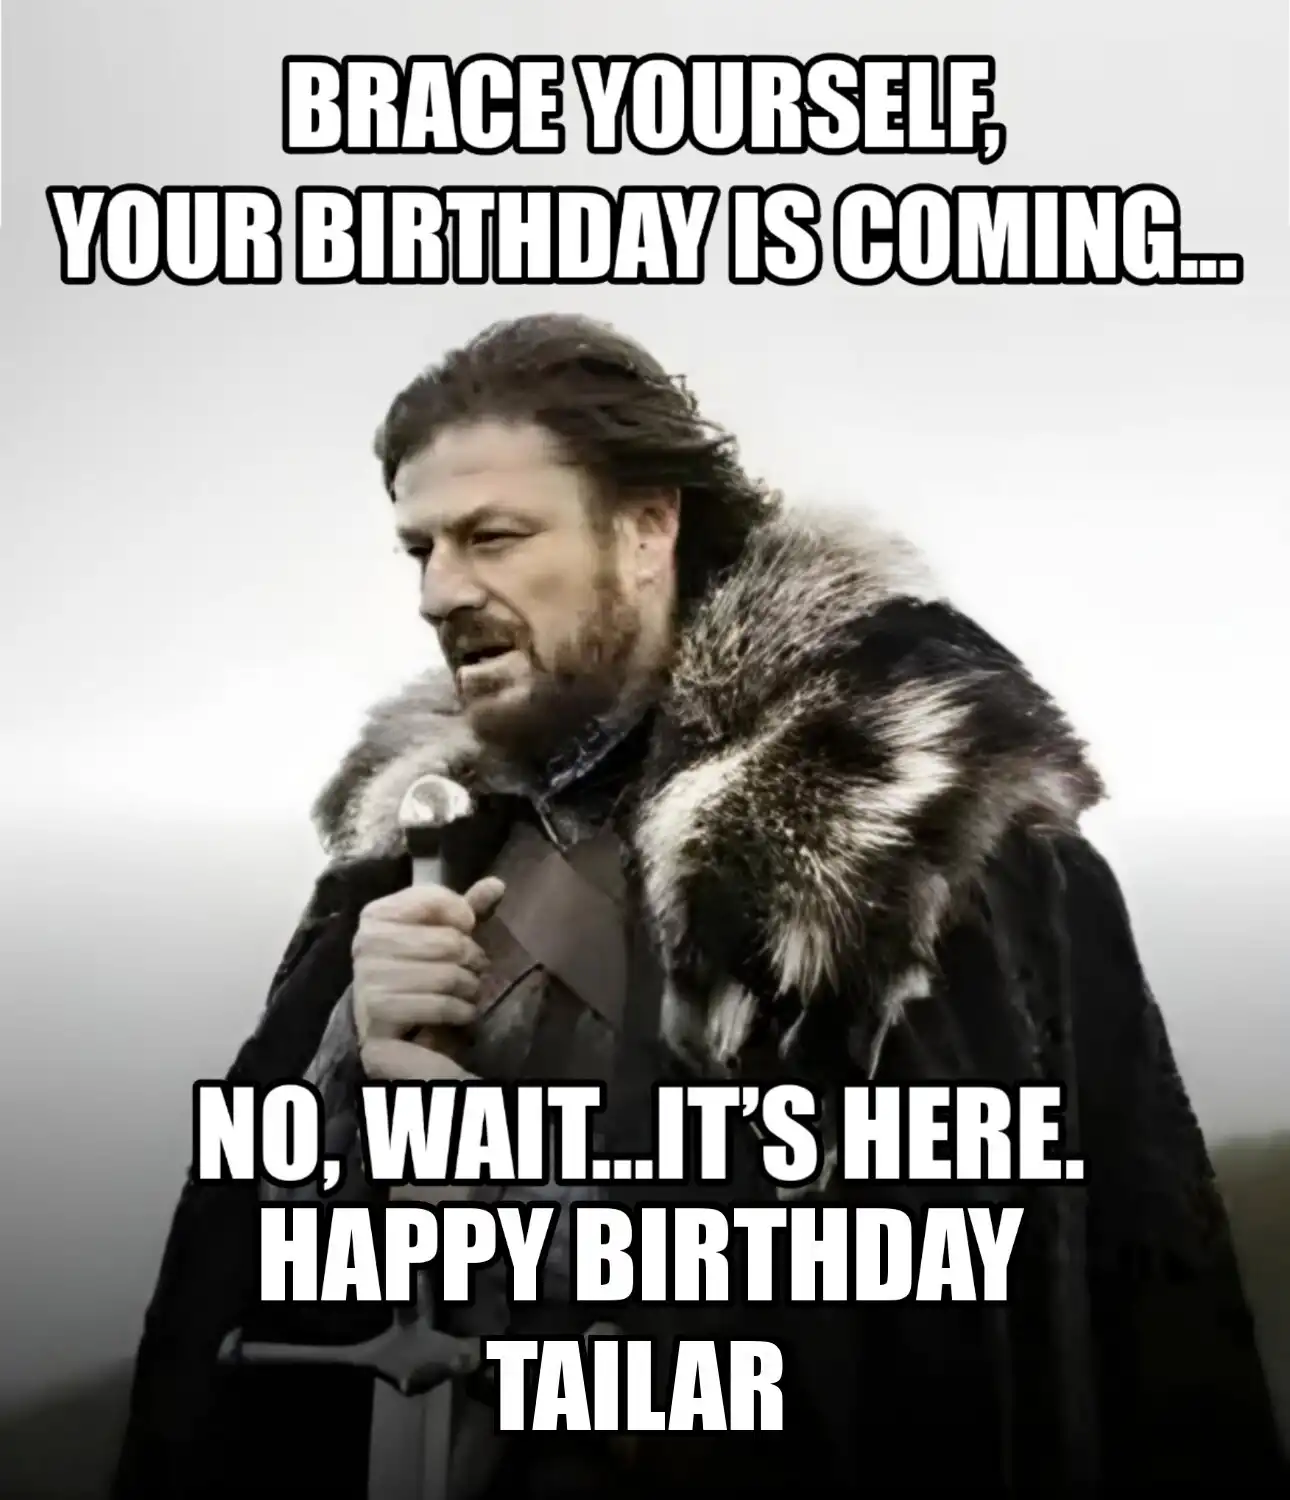 Happy Birthday Tailar Brace Yourself Your Birthday Is Coming Meme